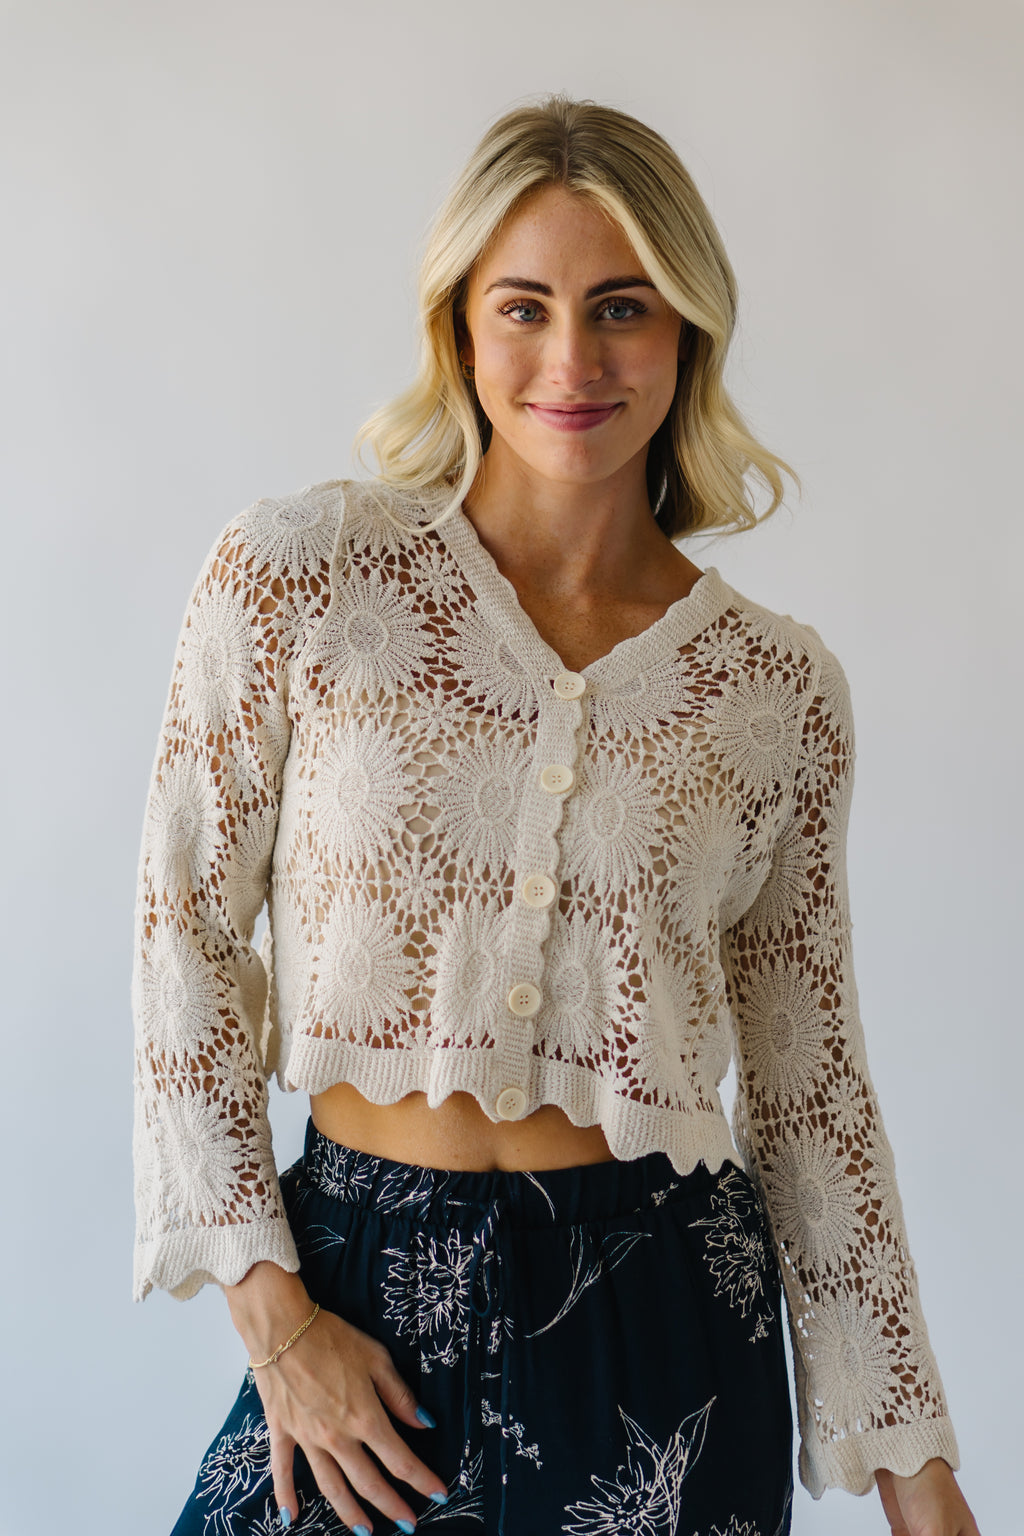 Piper & Scoot Tops | Boutique Clothing for Women